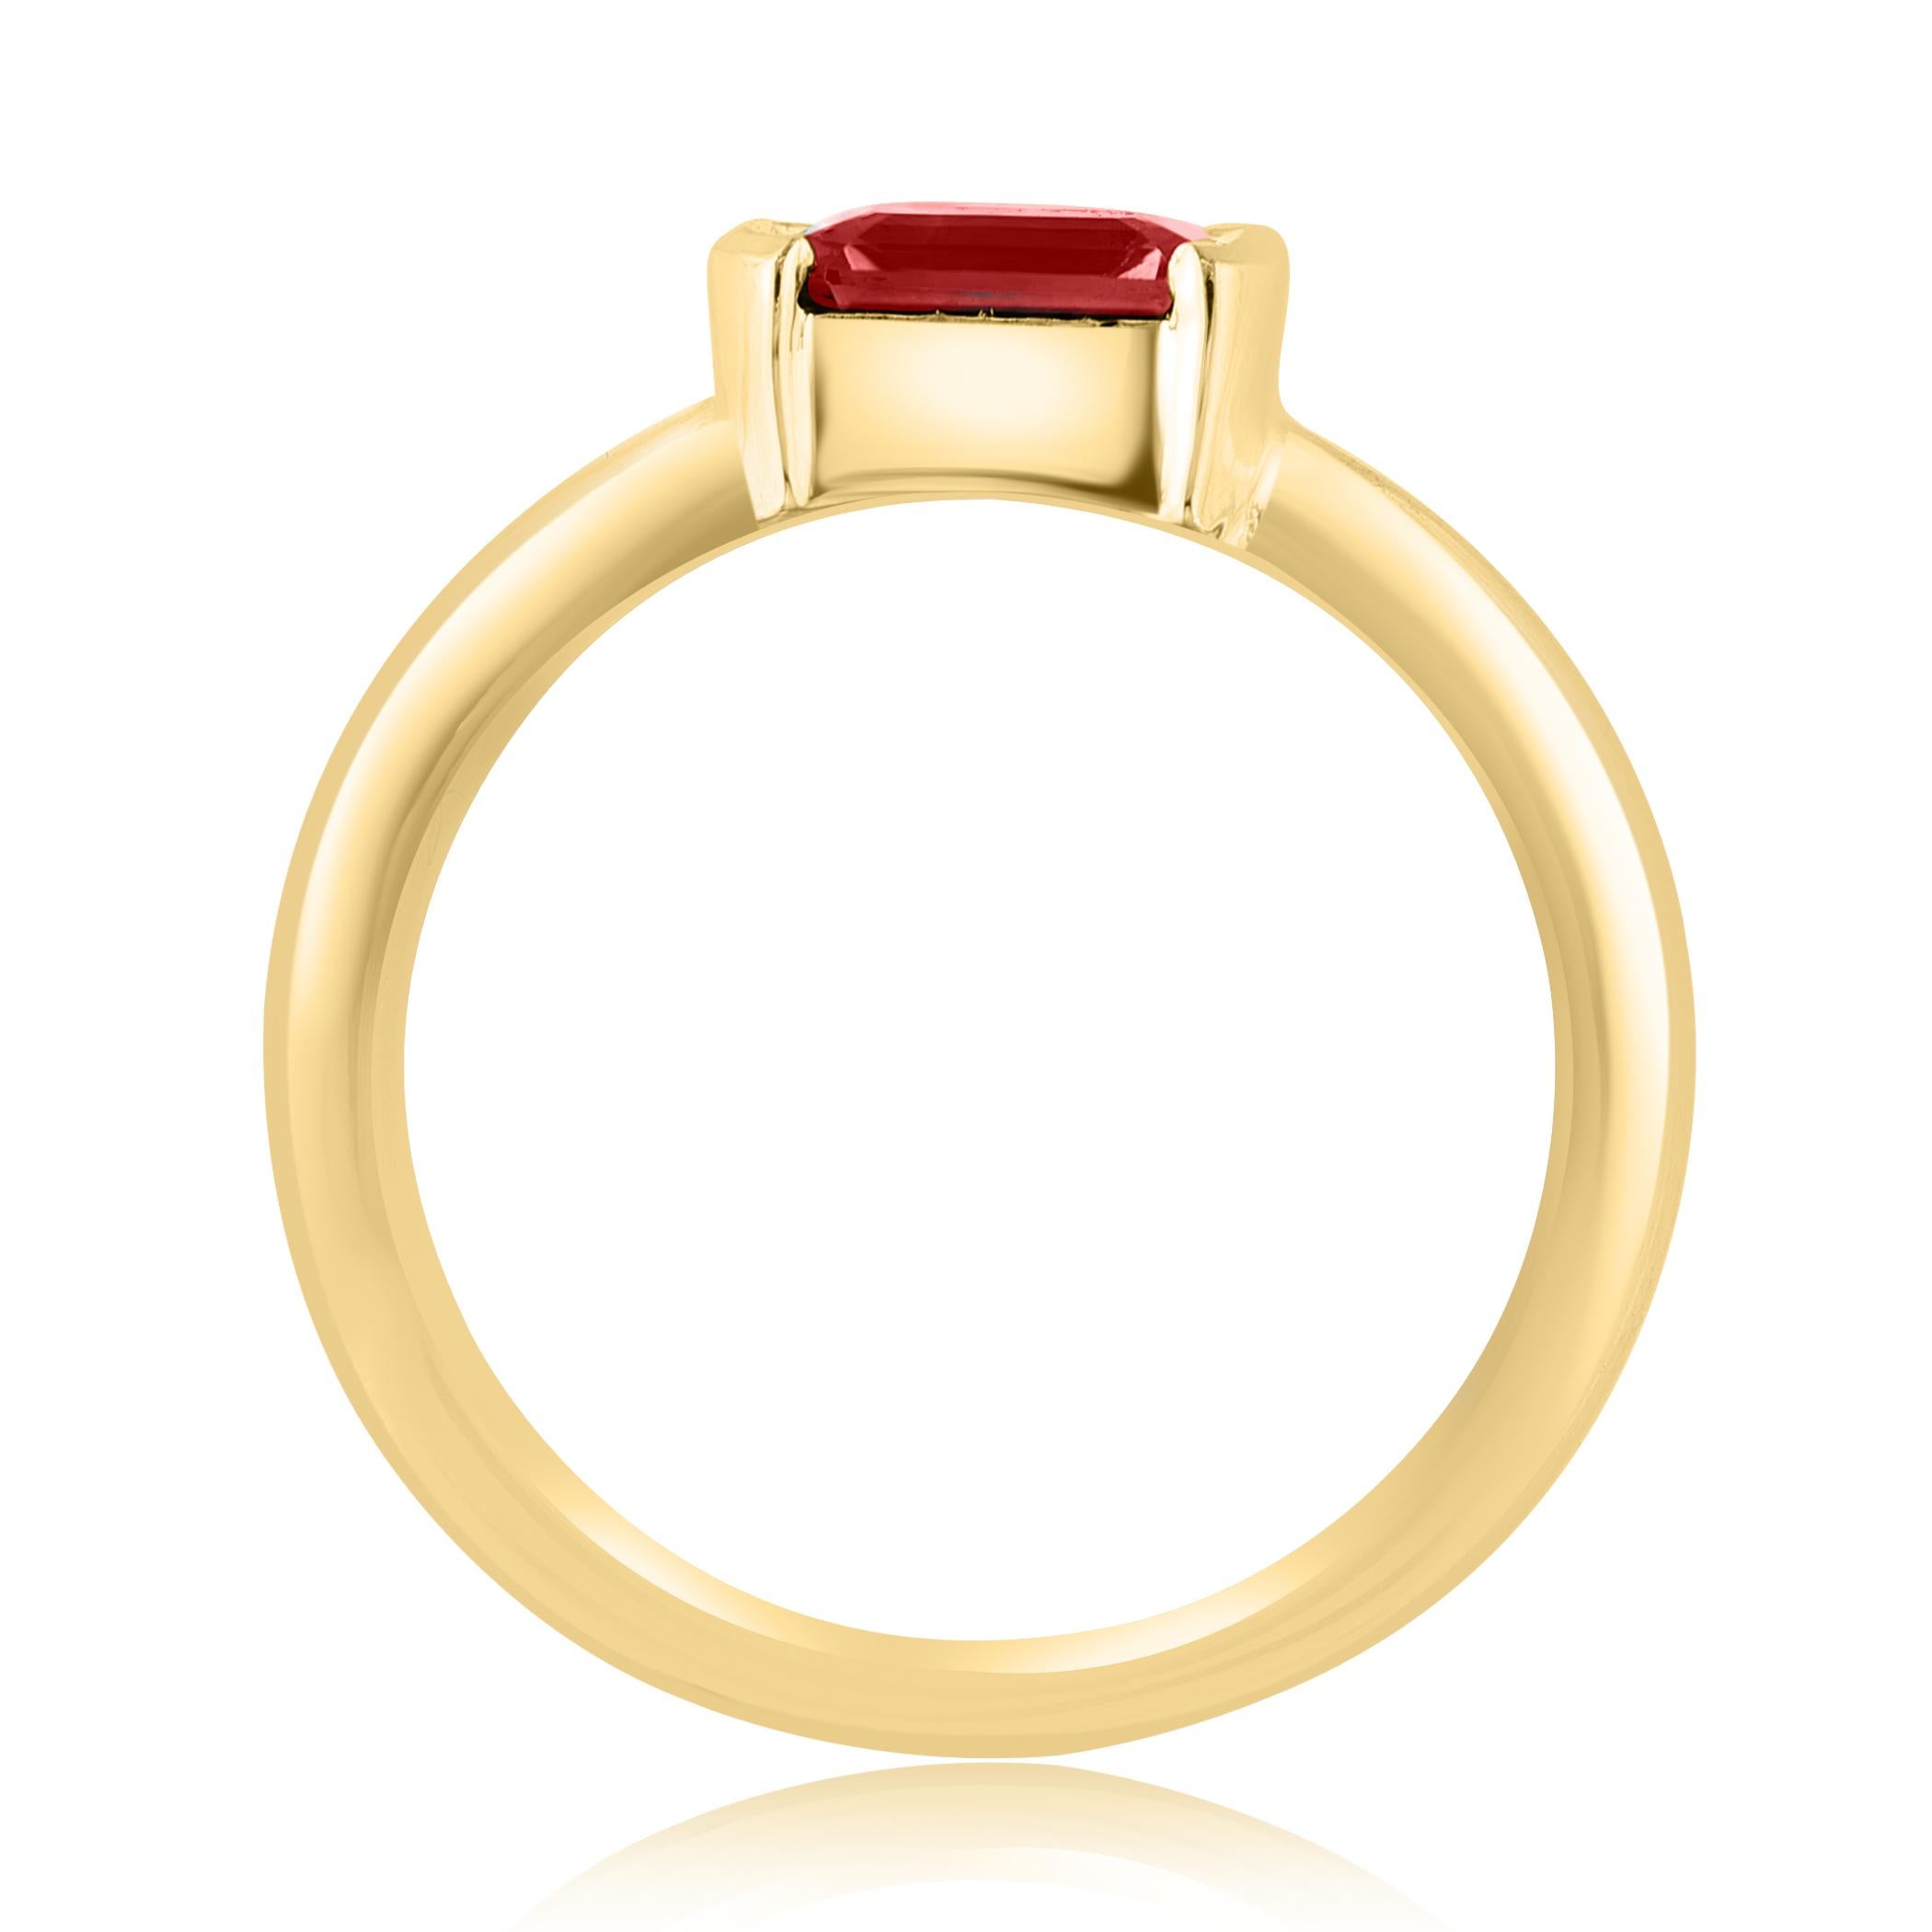 An elegant wedding band ring featuring an astonishing 1.06-carat emerald cut lush red ruby, set in a beautiful wide 14K yellow gold band. 

Style is available in different price ranges. Prices are based on your selection. Don't hesitate to get in